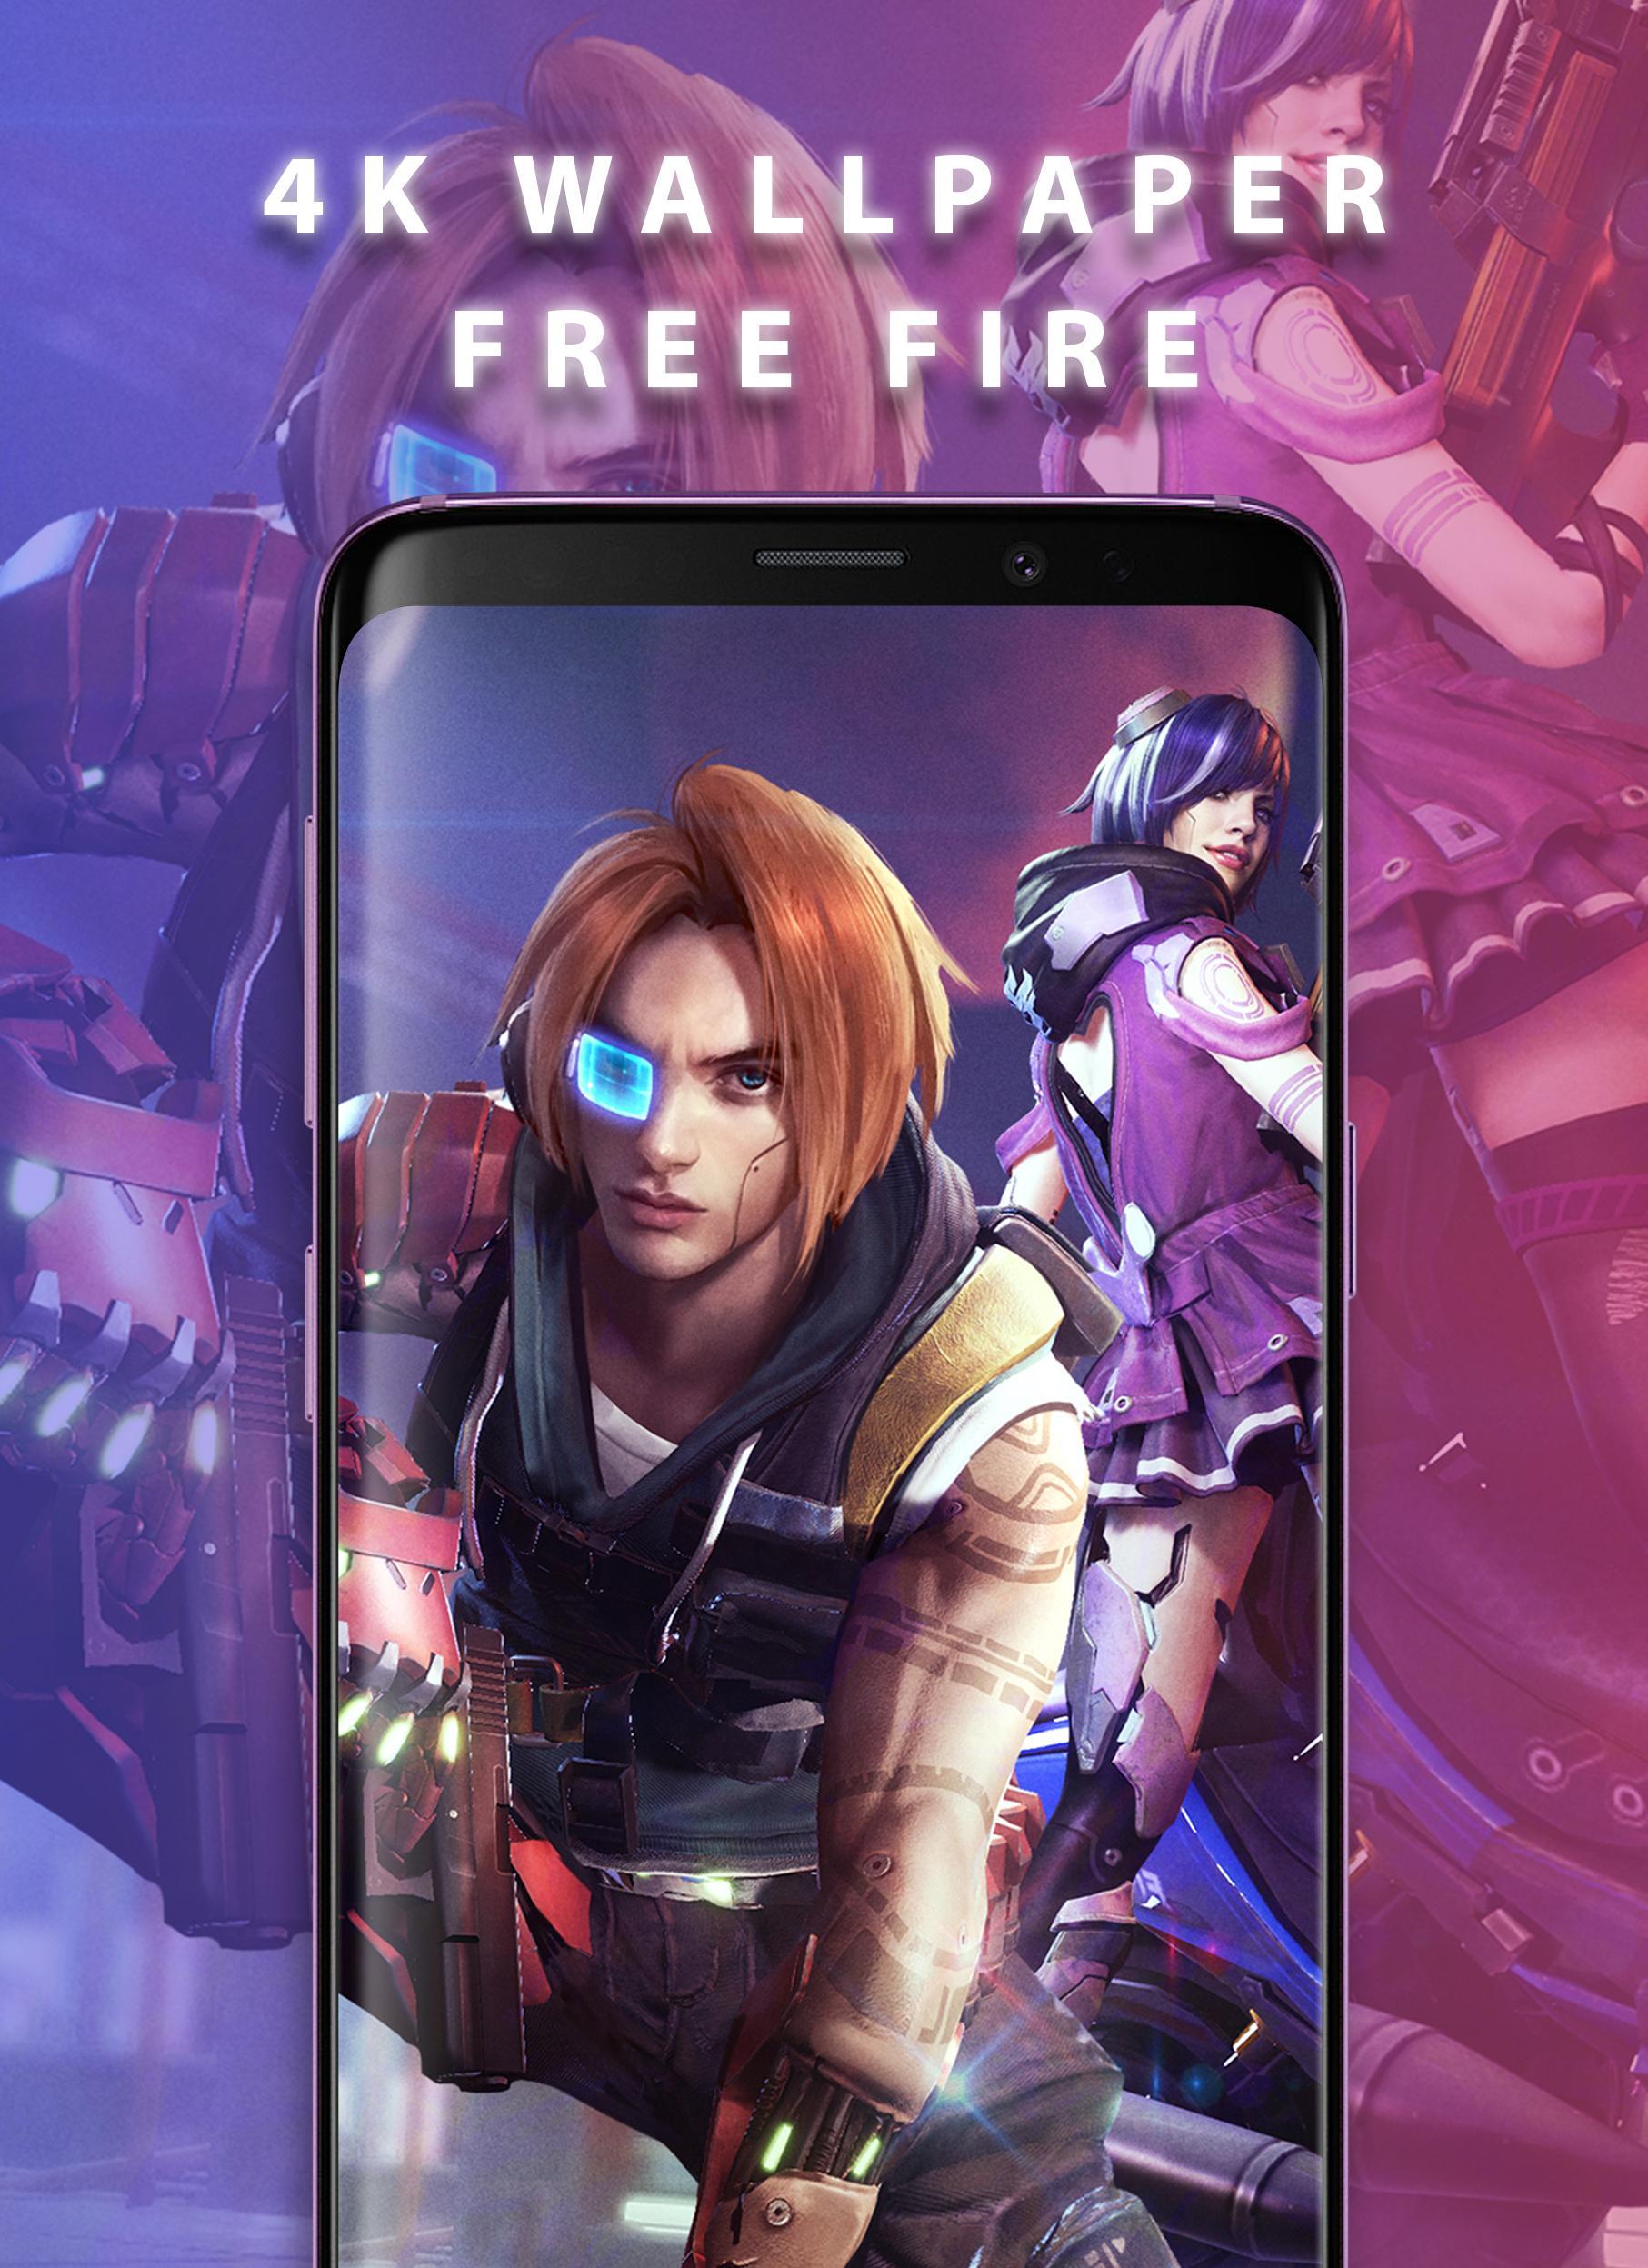 4K Wallpaper Free Fire Elite Pass For Android APK Download